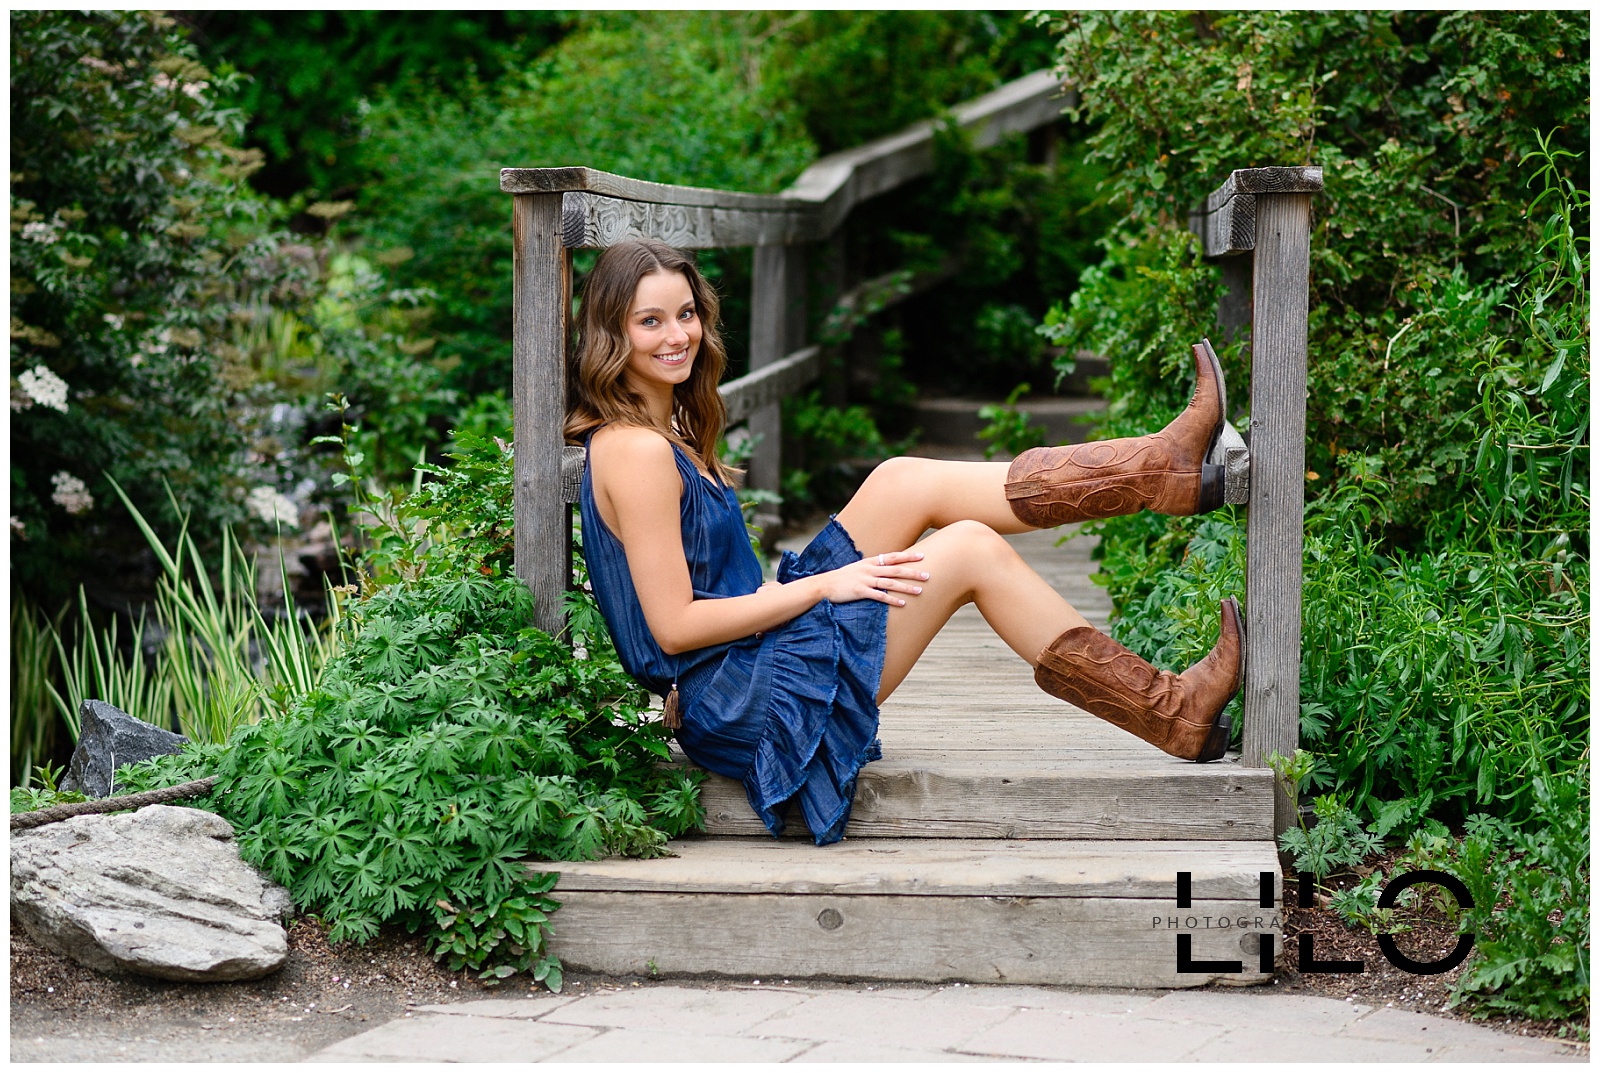 Denver Senior Pictures at Denver Botanic Gardens with young woman sitting on a bridge while wearing a dark blue dress and boots photographed by Denver senior photographer